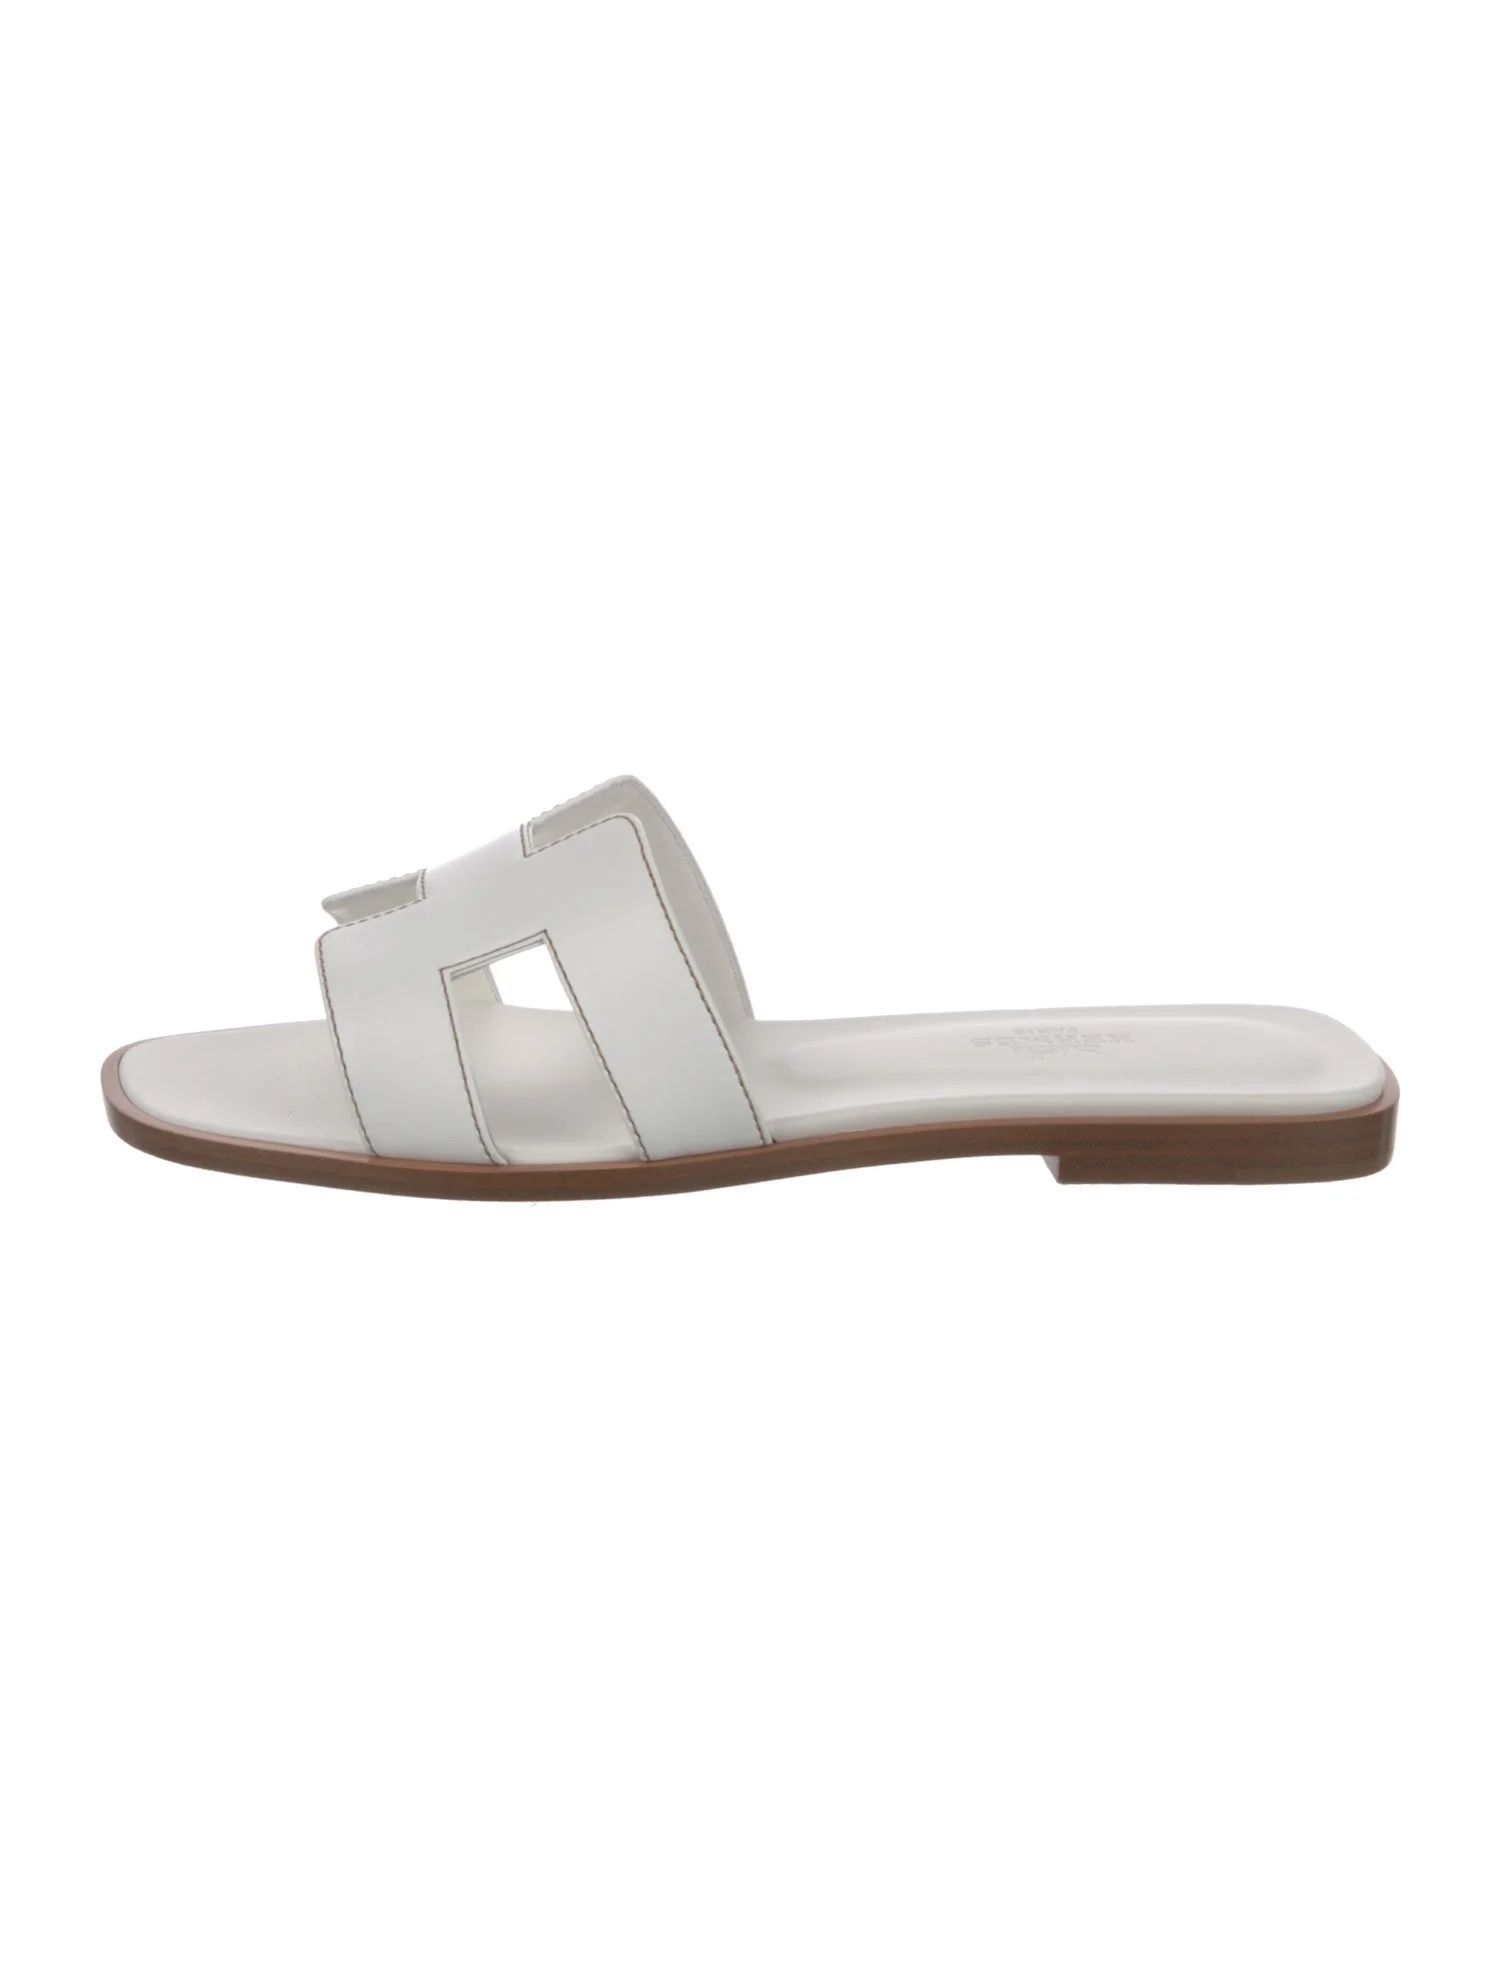 Oran Leather Slides | The RealReal